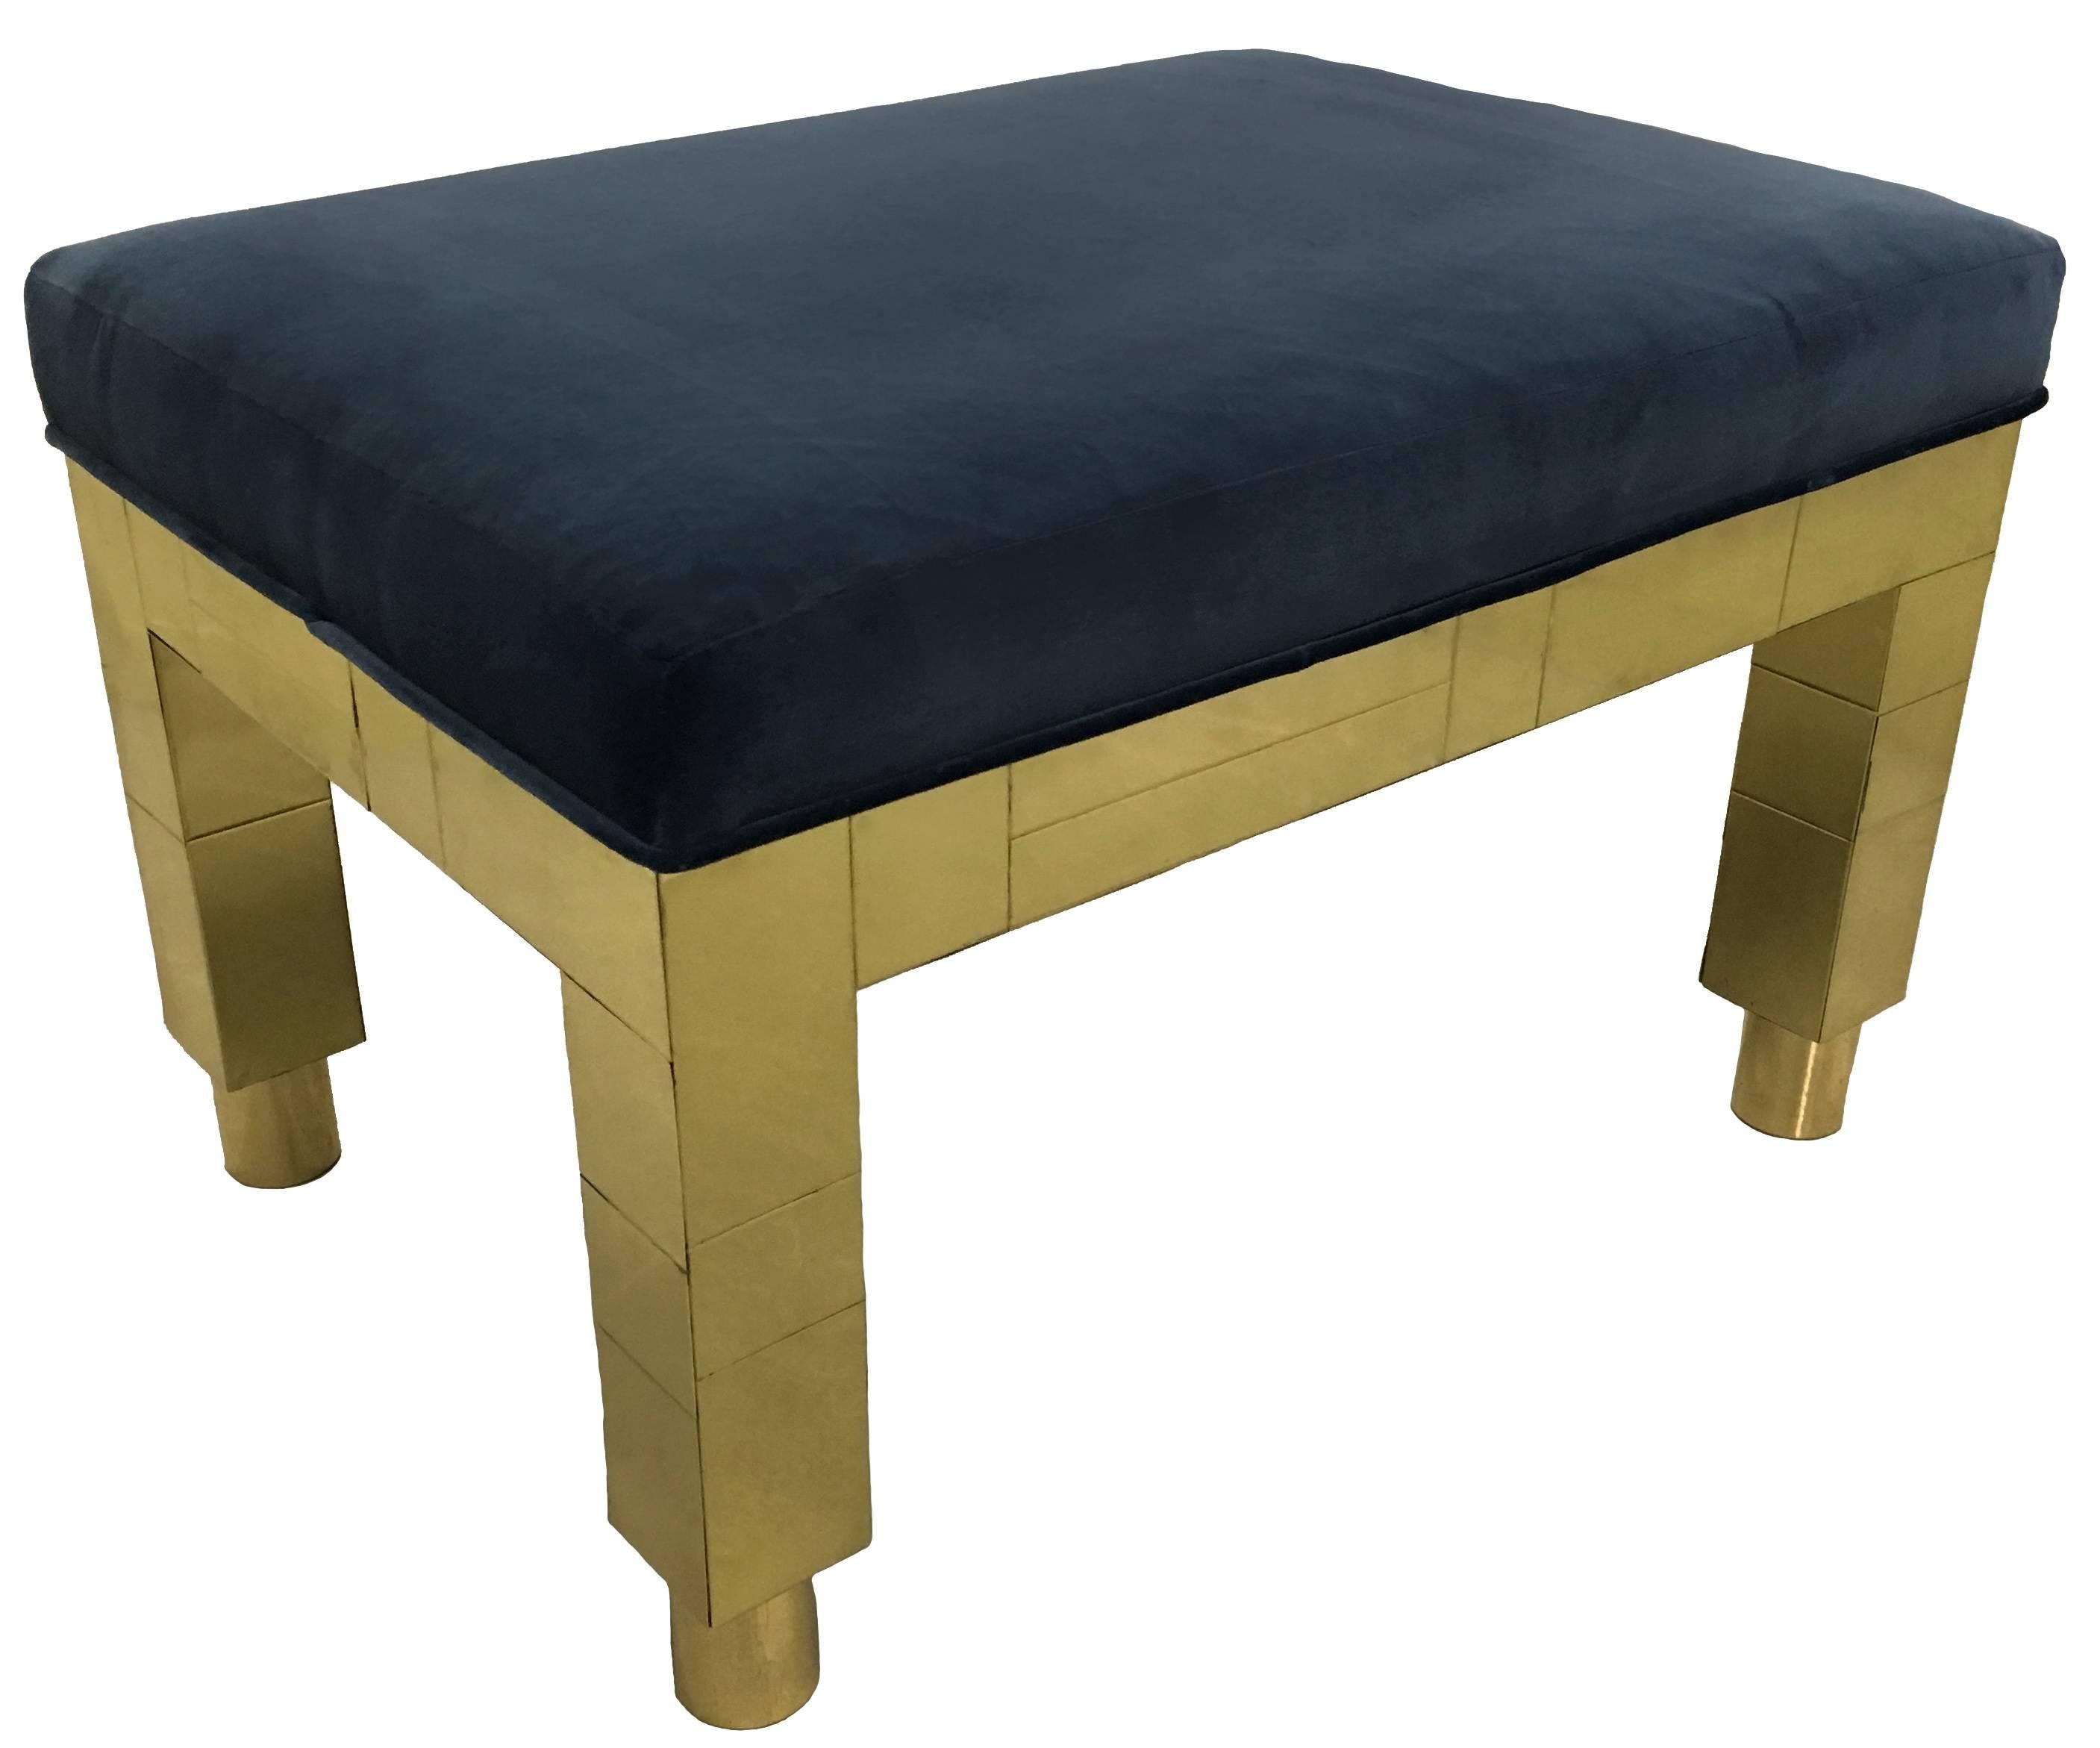 Pair of Paul Evans for Directional Furniture Cityscape benches. Polished brass patchwork design. Newly upholstered in navy velvet. Benches retain original Paul Evans labels, circa 1977. 
Bottom cylindrical brass casters can be removed if desired. 